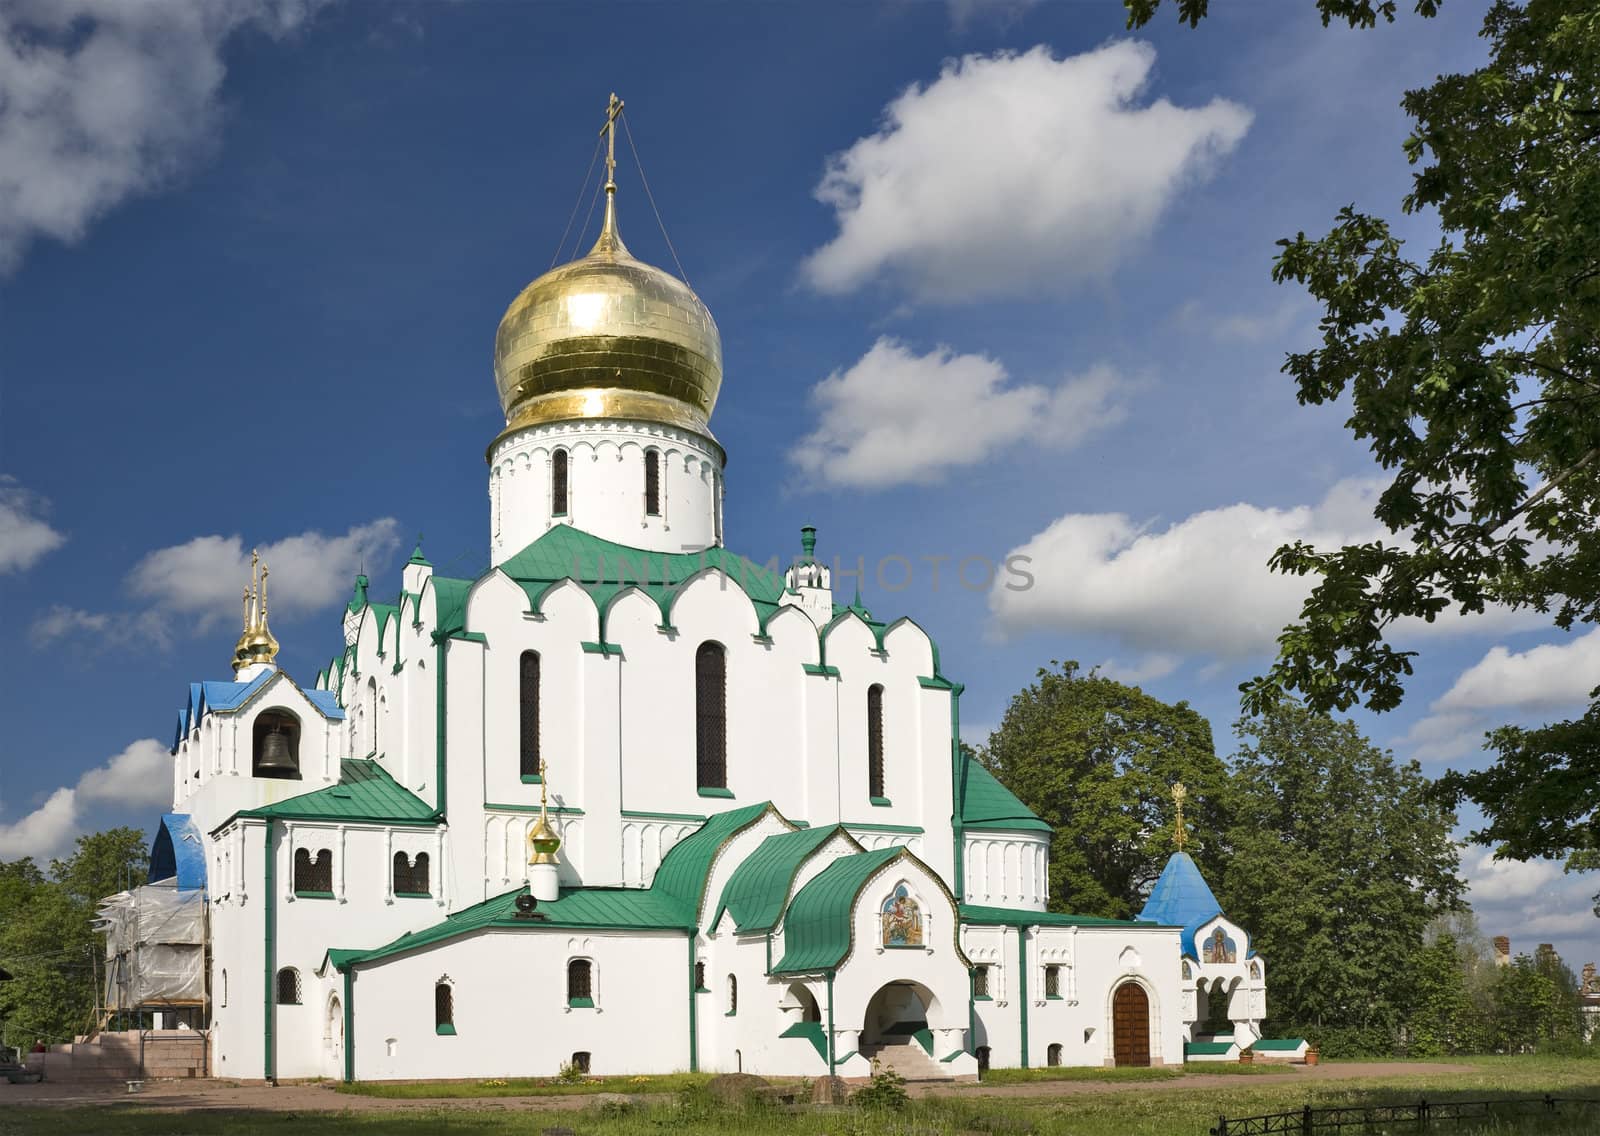 Russian cathedral with gold cupola by mulden